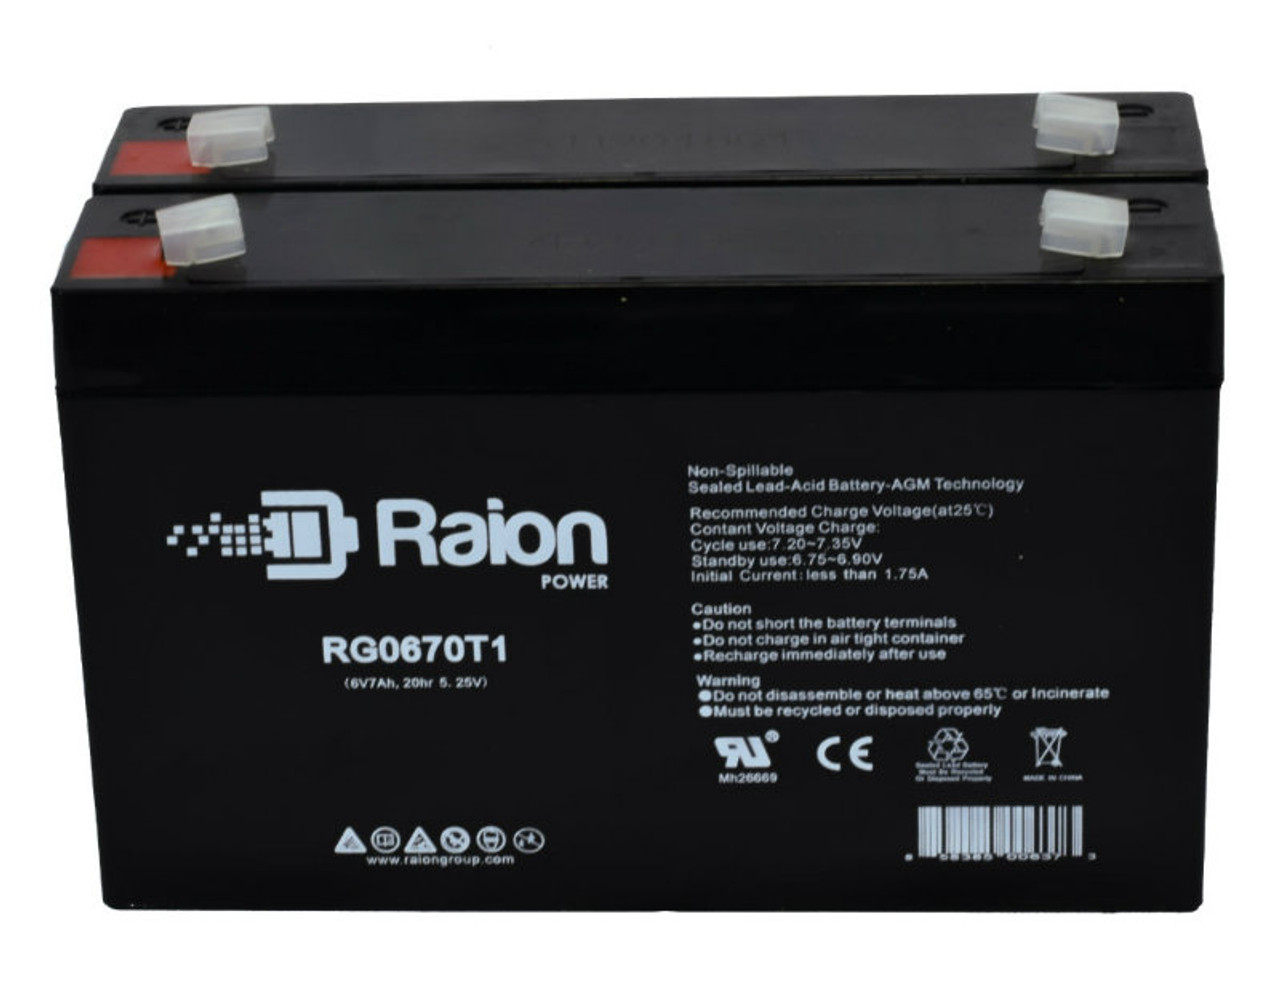 Raion Power RG0670T1 6V 7Ah Replacement Battery for McGaw Home Pro 4 Infusion Pump - 2 Pack